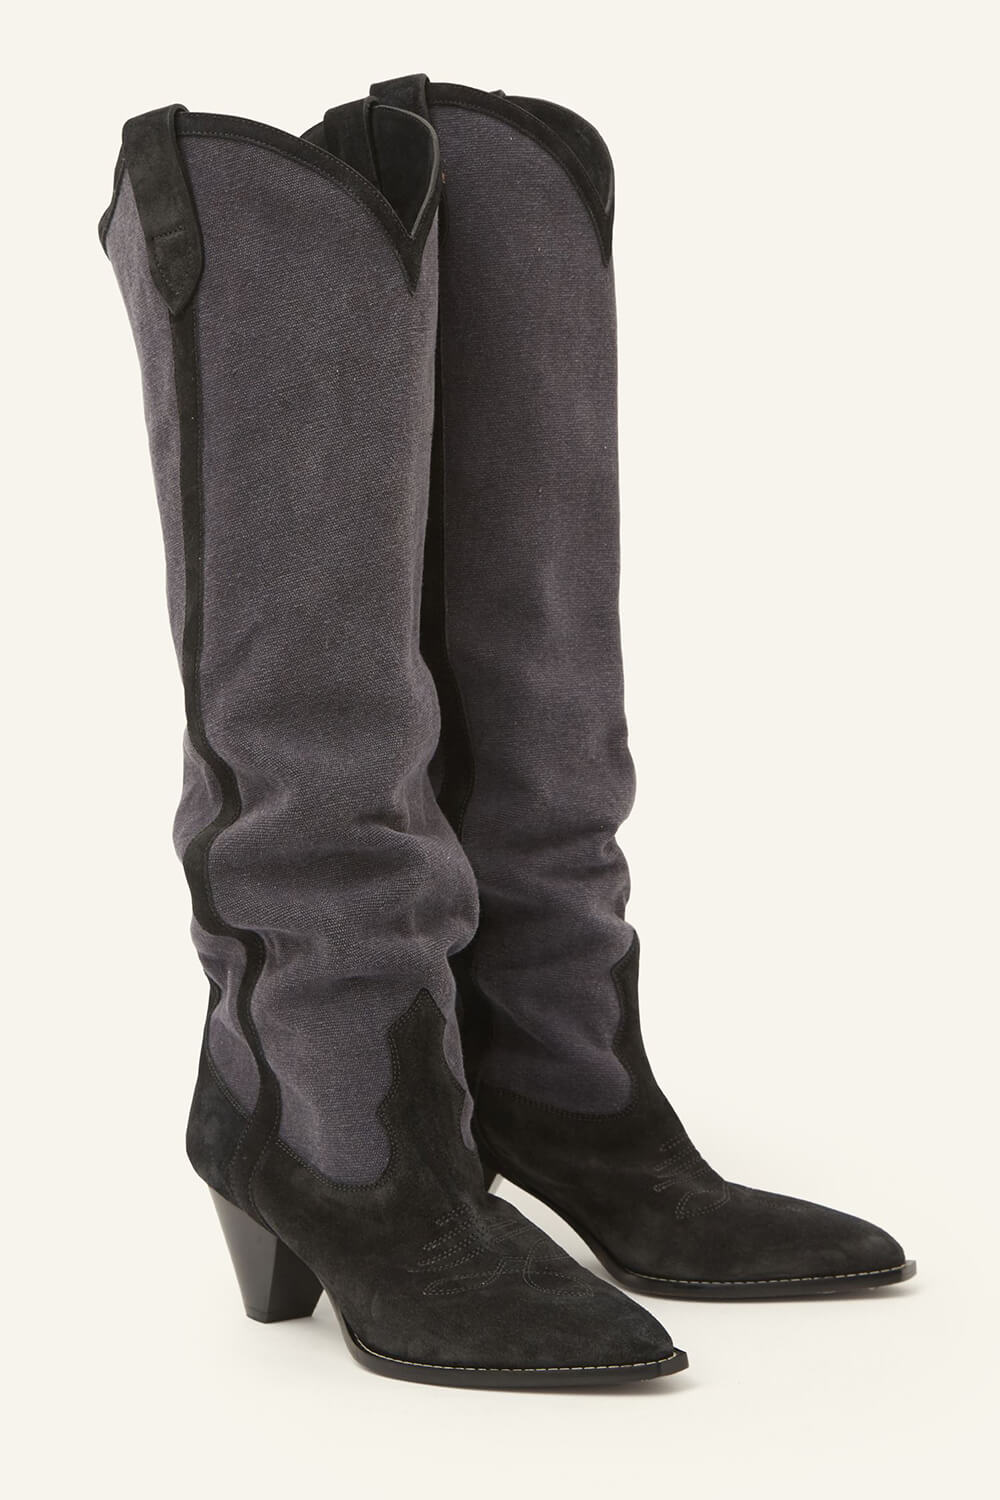 Suede Two-Tone Pointed Toe Western Cowboy Knee High Boots - Grey